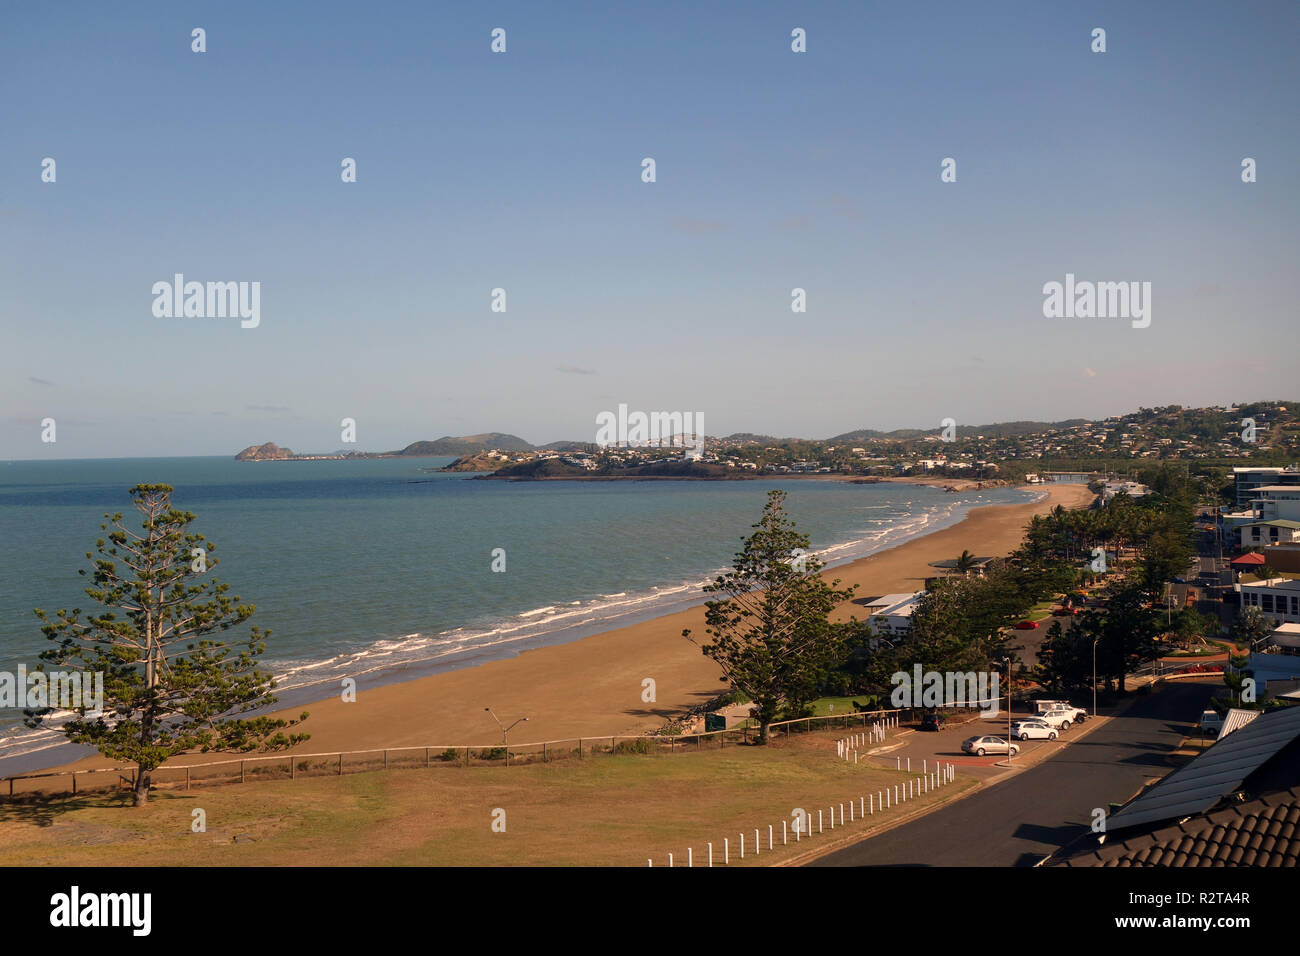 View from top of Cliff St of Yeppoon's main street and beach, Queensland, Australia. No PR Stock Photo